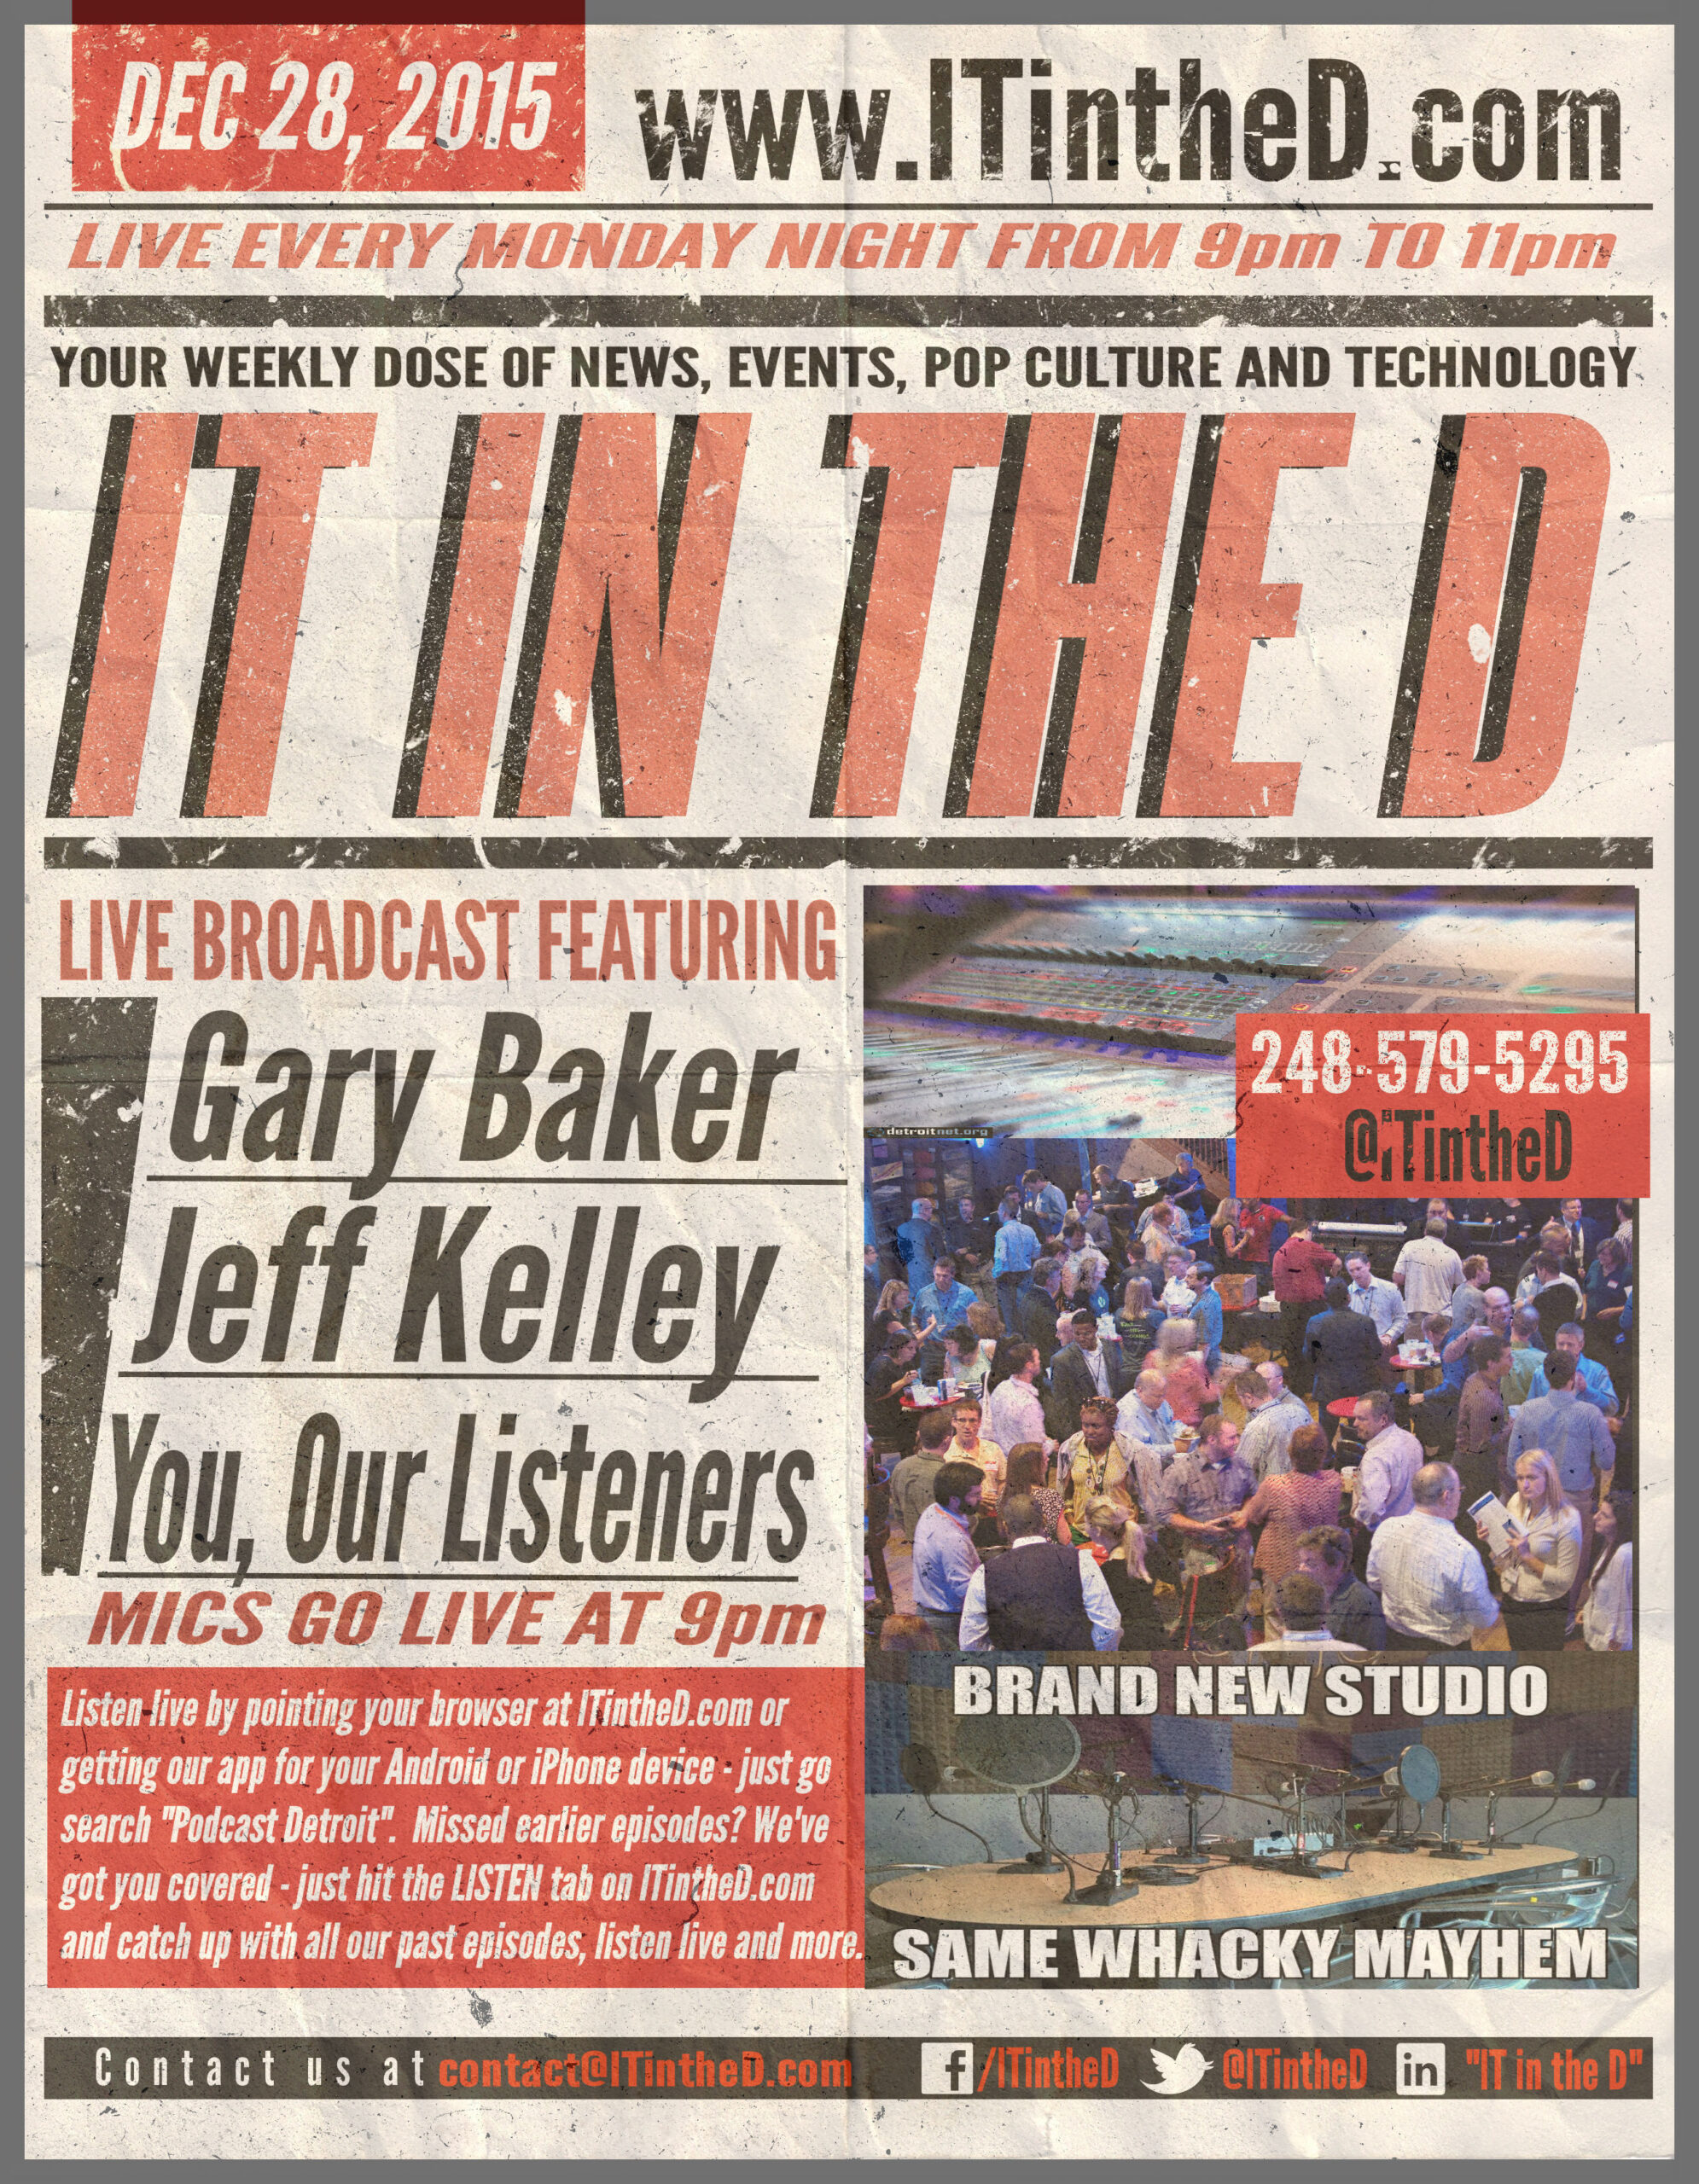 Wrapping up 2015, Gary Baker and Jeff Kelley In Studio Tonight, Updates for 12/28/2015